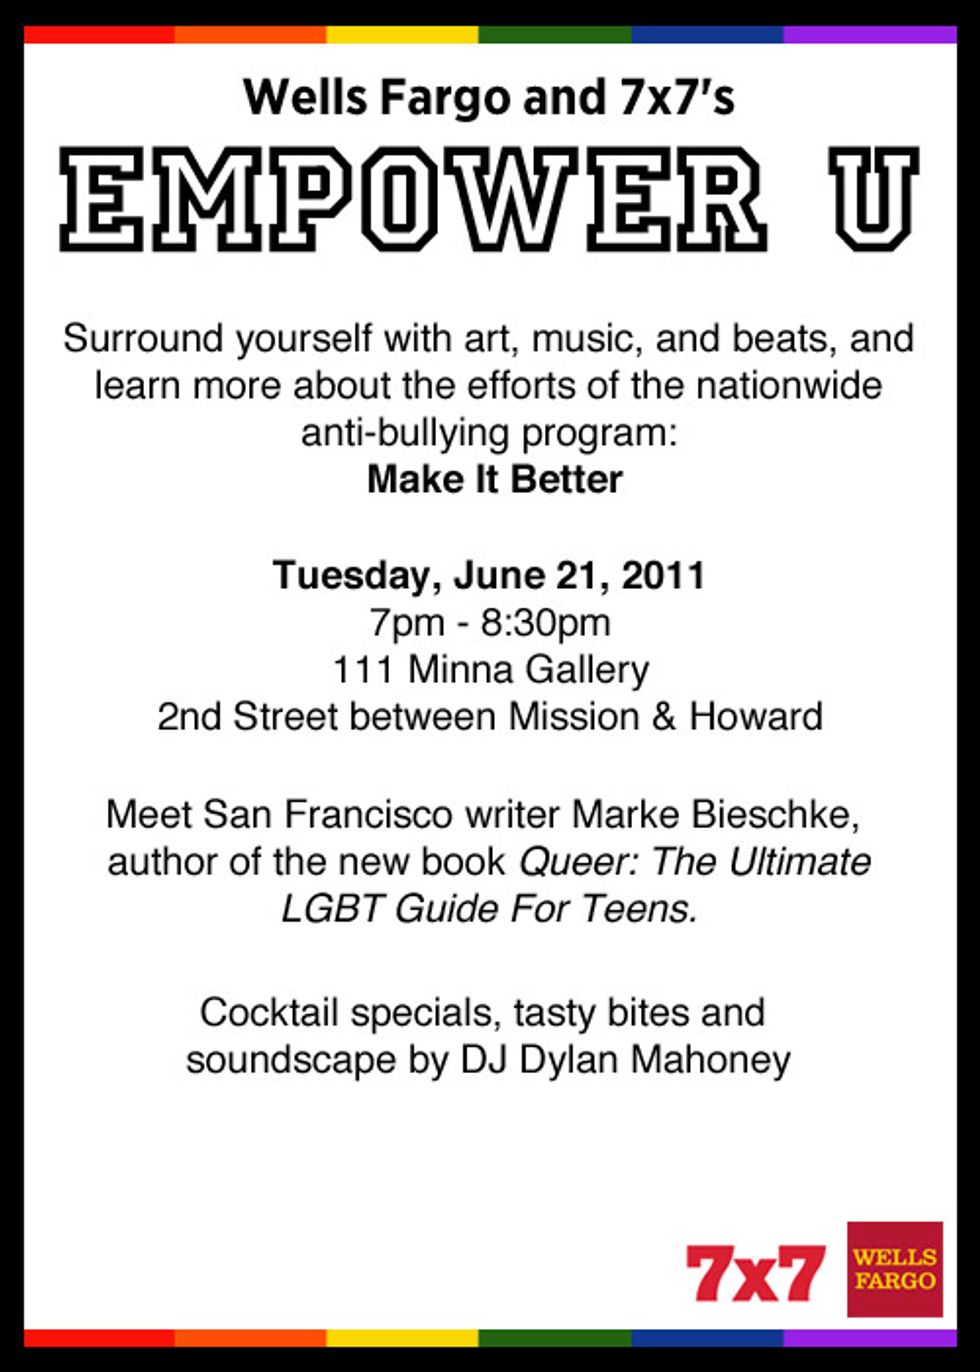 7x7 and Wells Fargo's "Empower U" Pride Party at 111 Minna